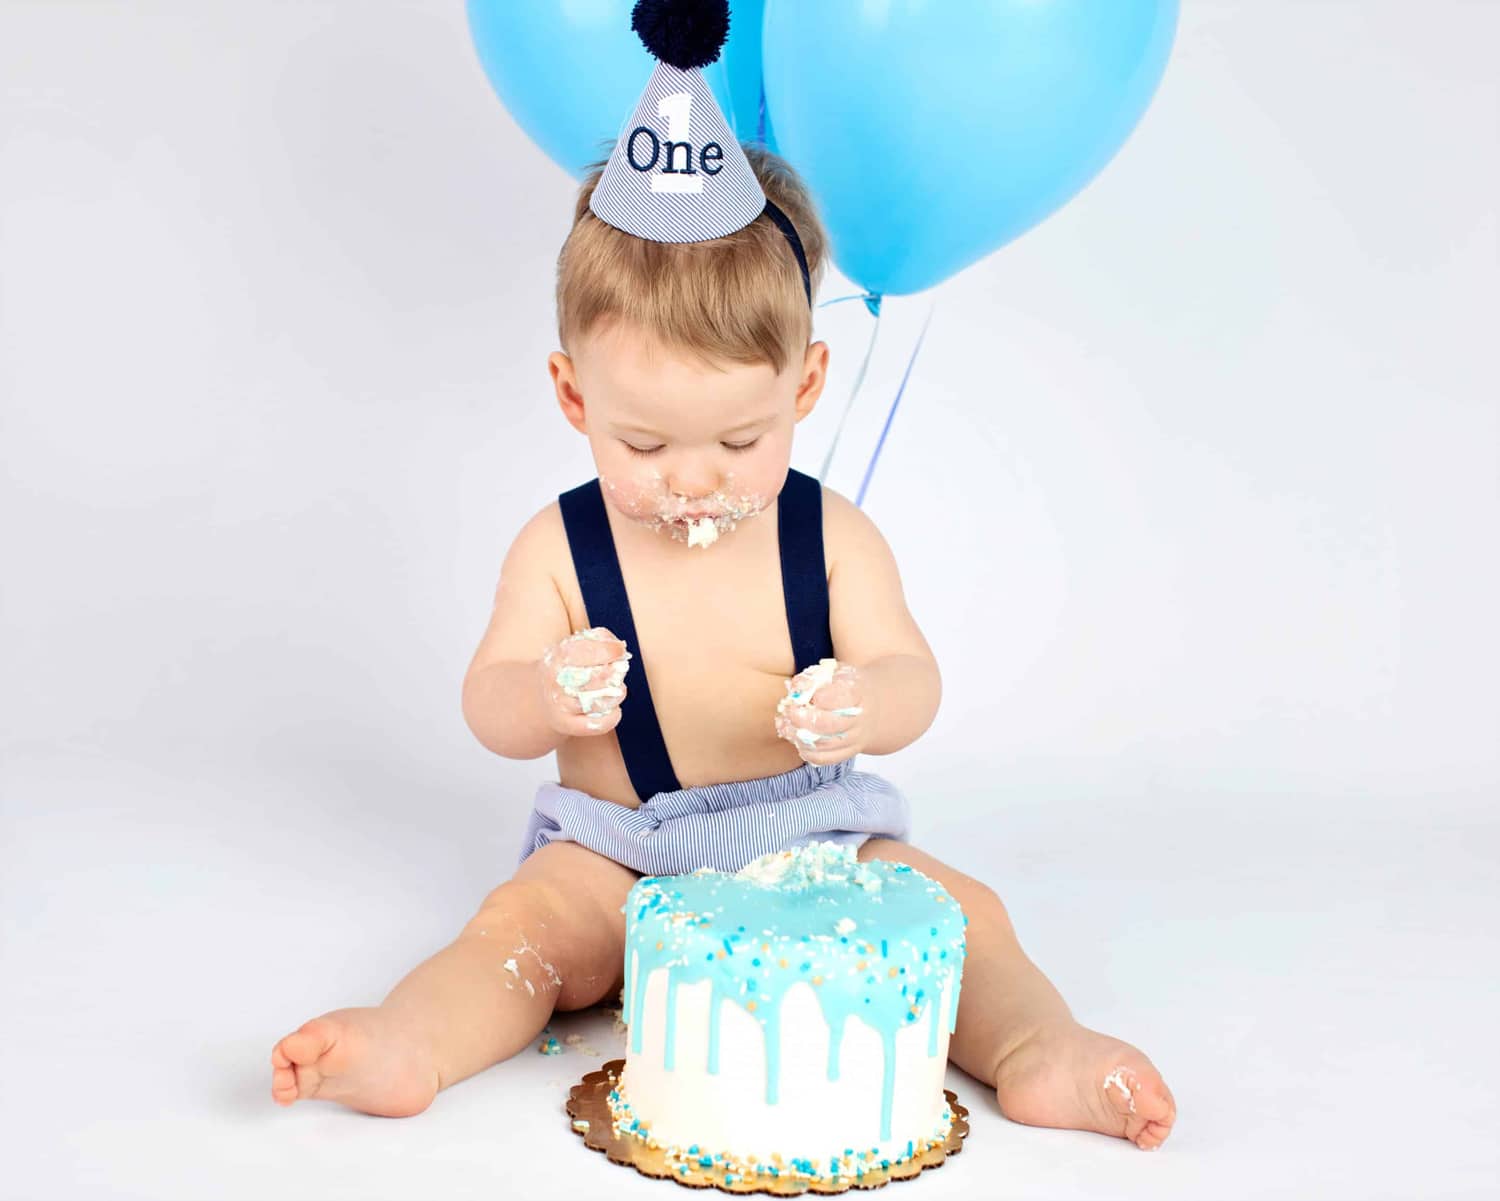 A one year old baby eats a blue birthday cake.